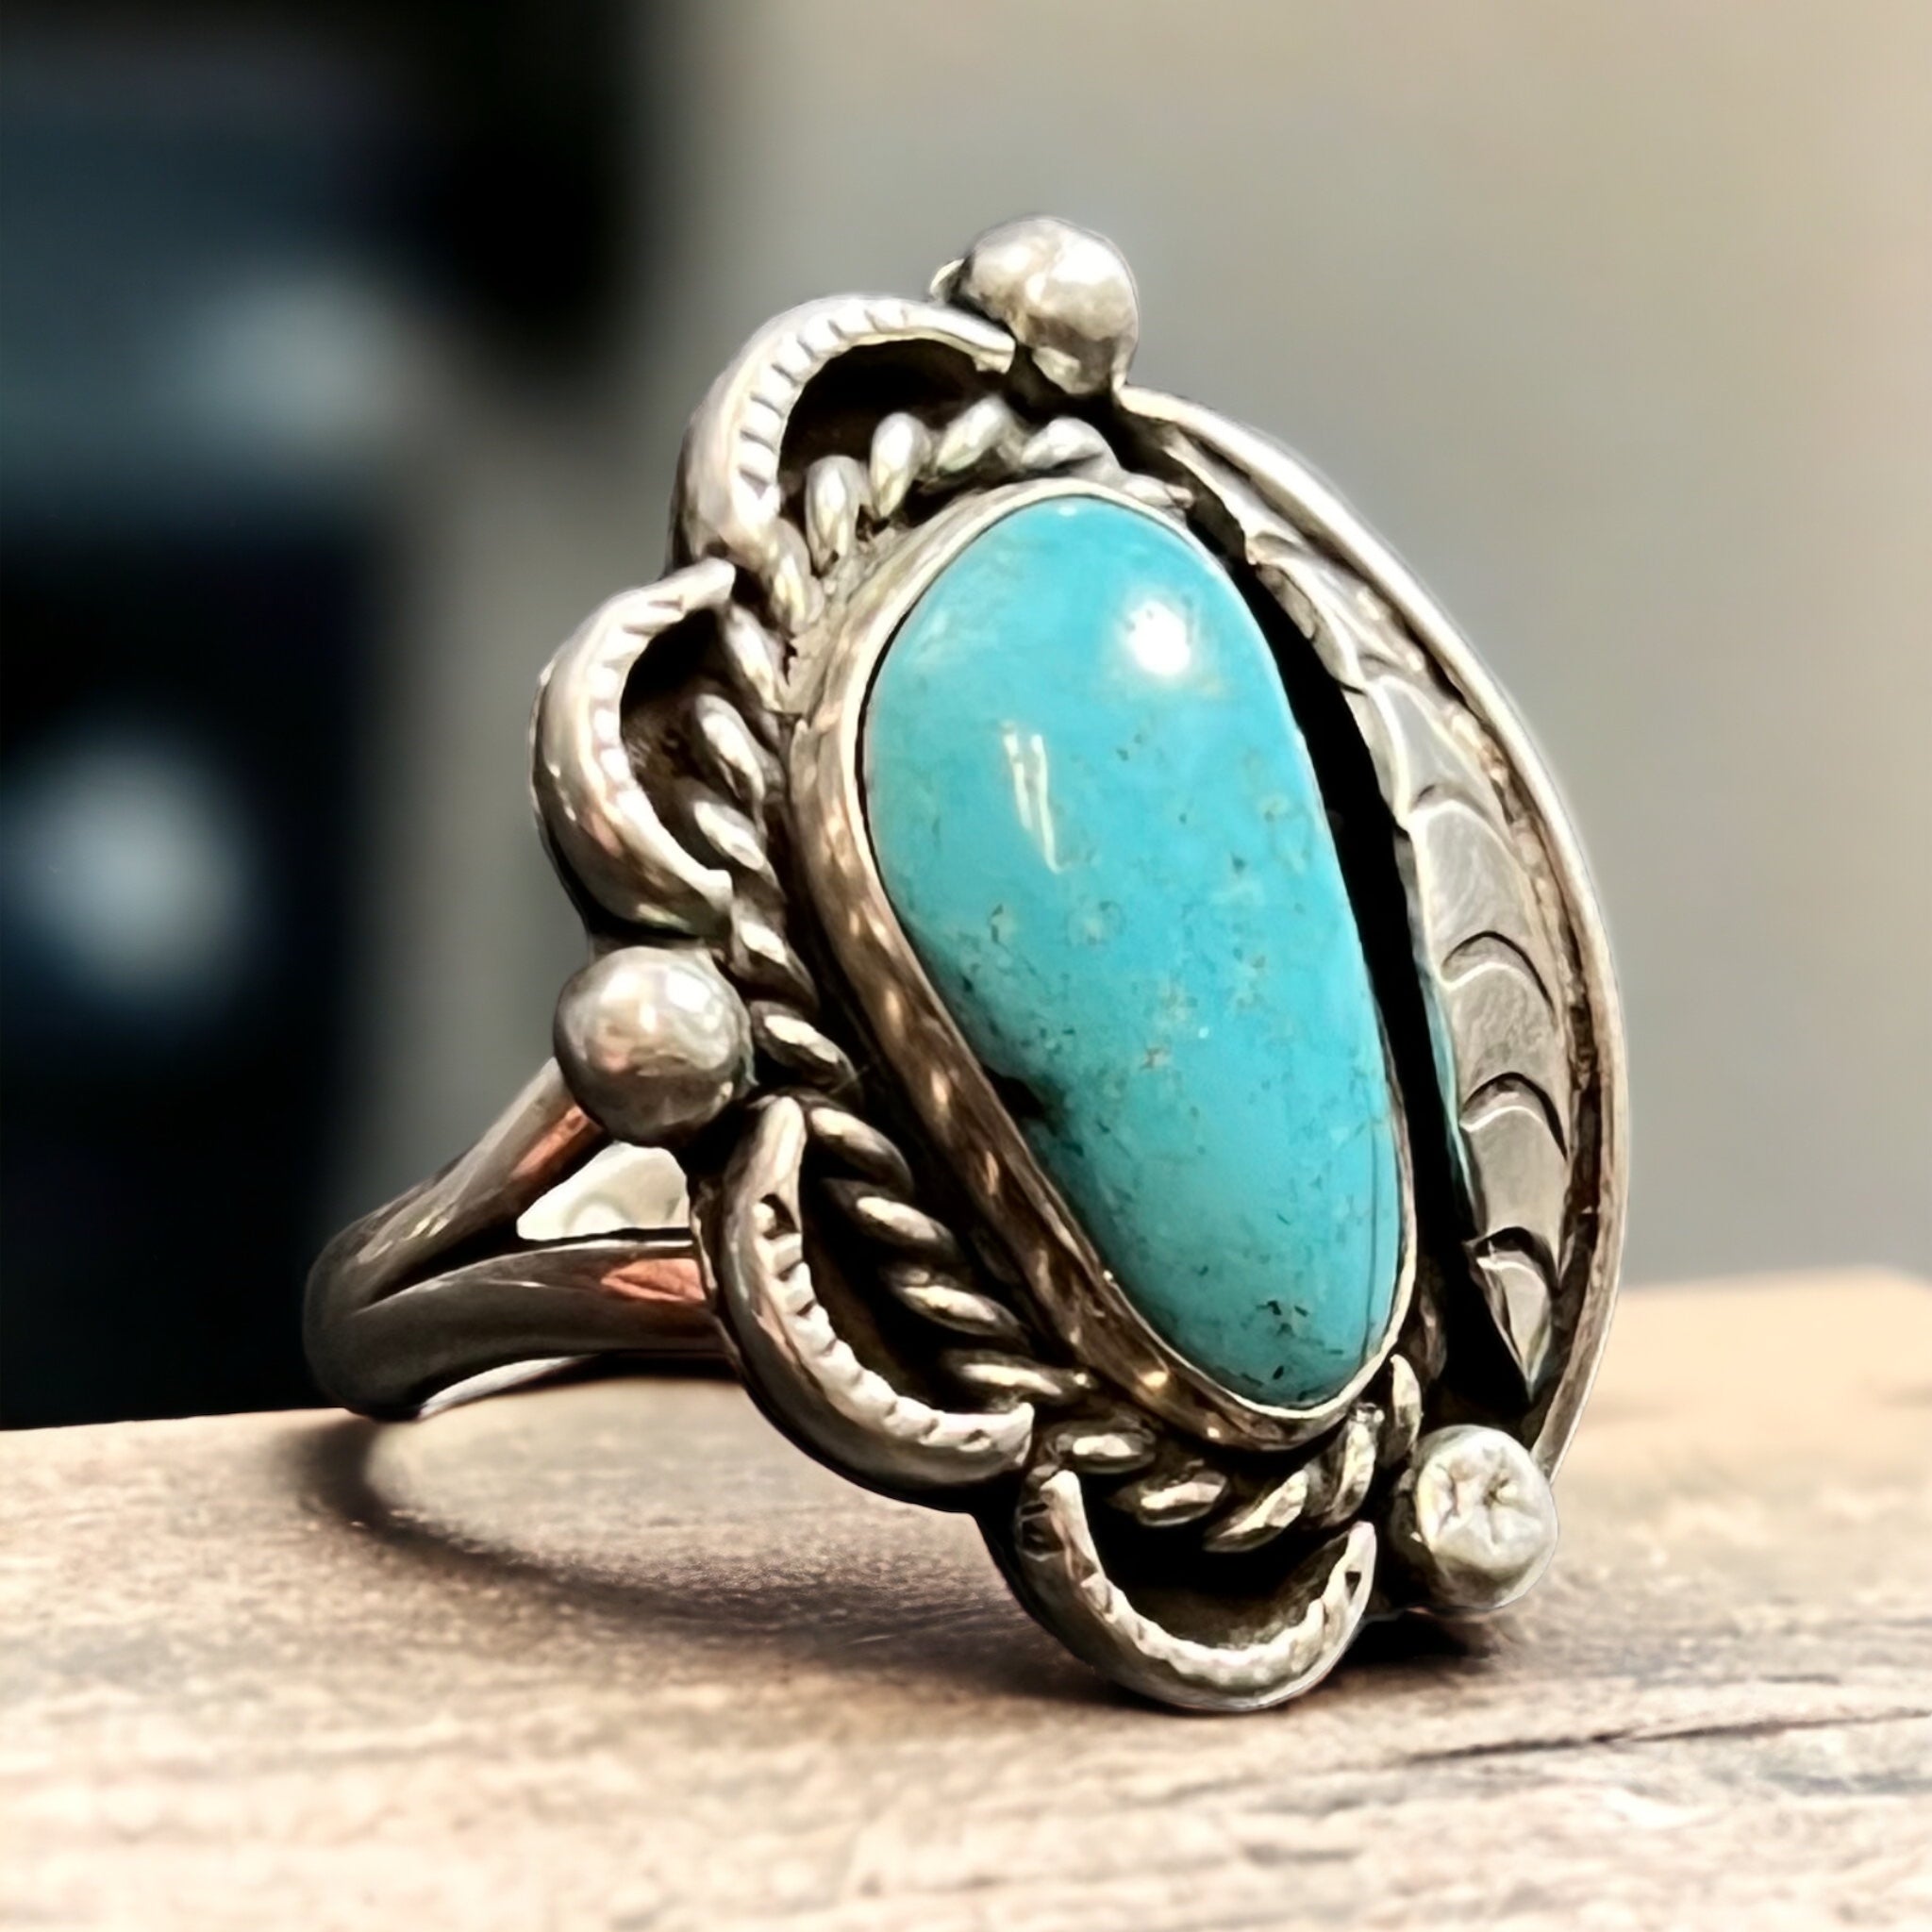 Twisted Silver Wire Ring, Oxidized with an Engraved Design - Silvertraits